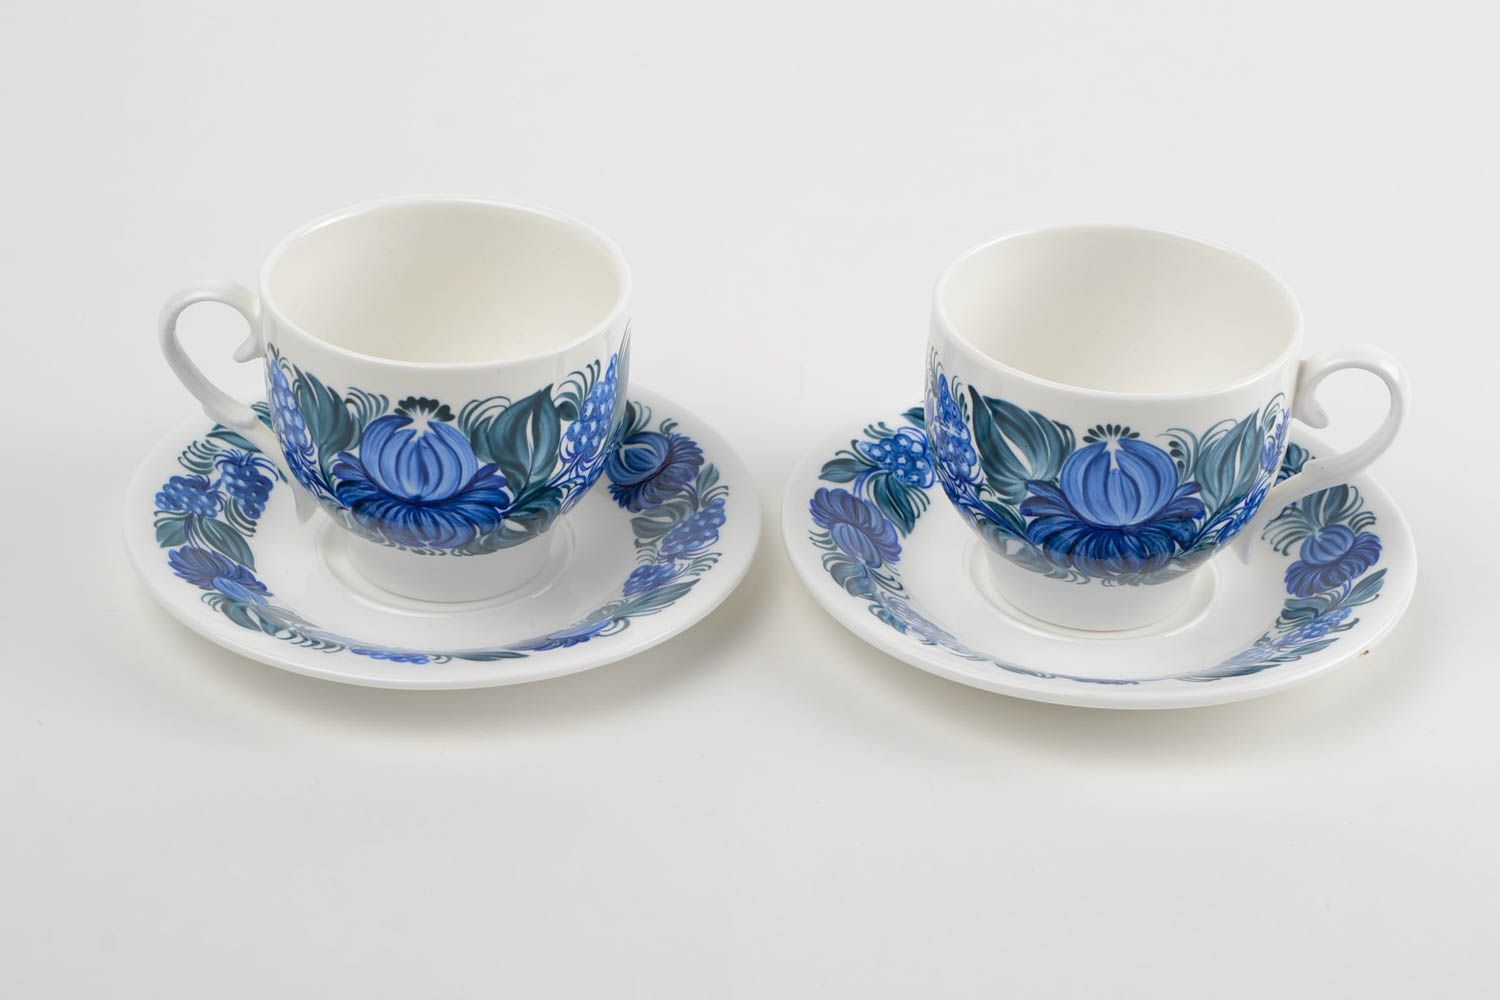 Set of two porcelain white and blue 5 oz tea cups and saucers with floral pattern photo 5